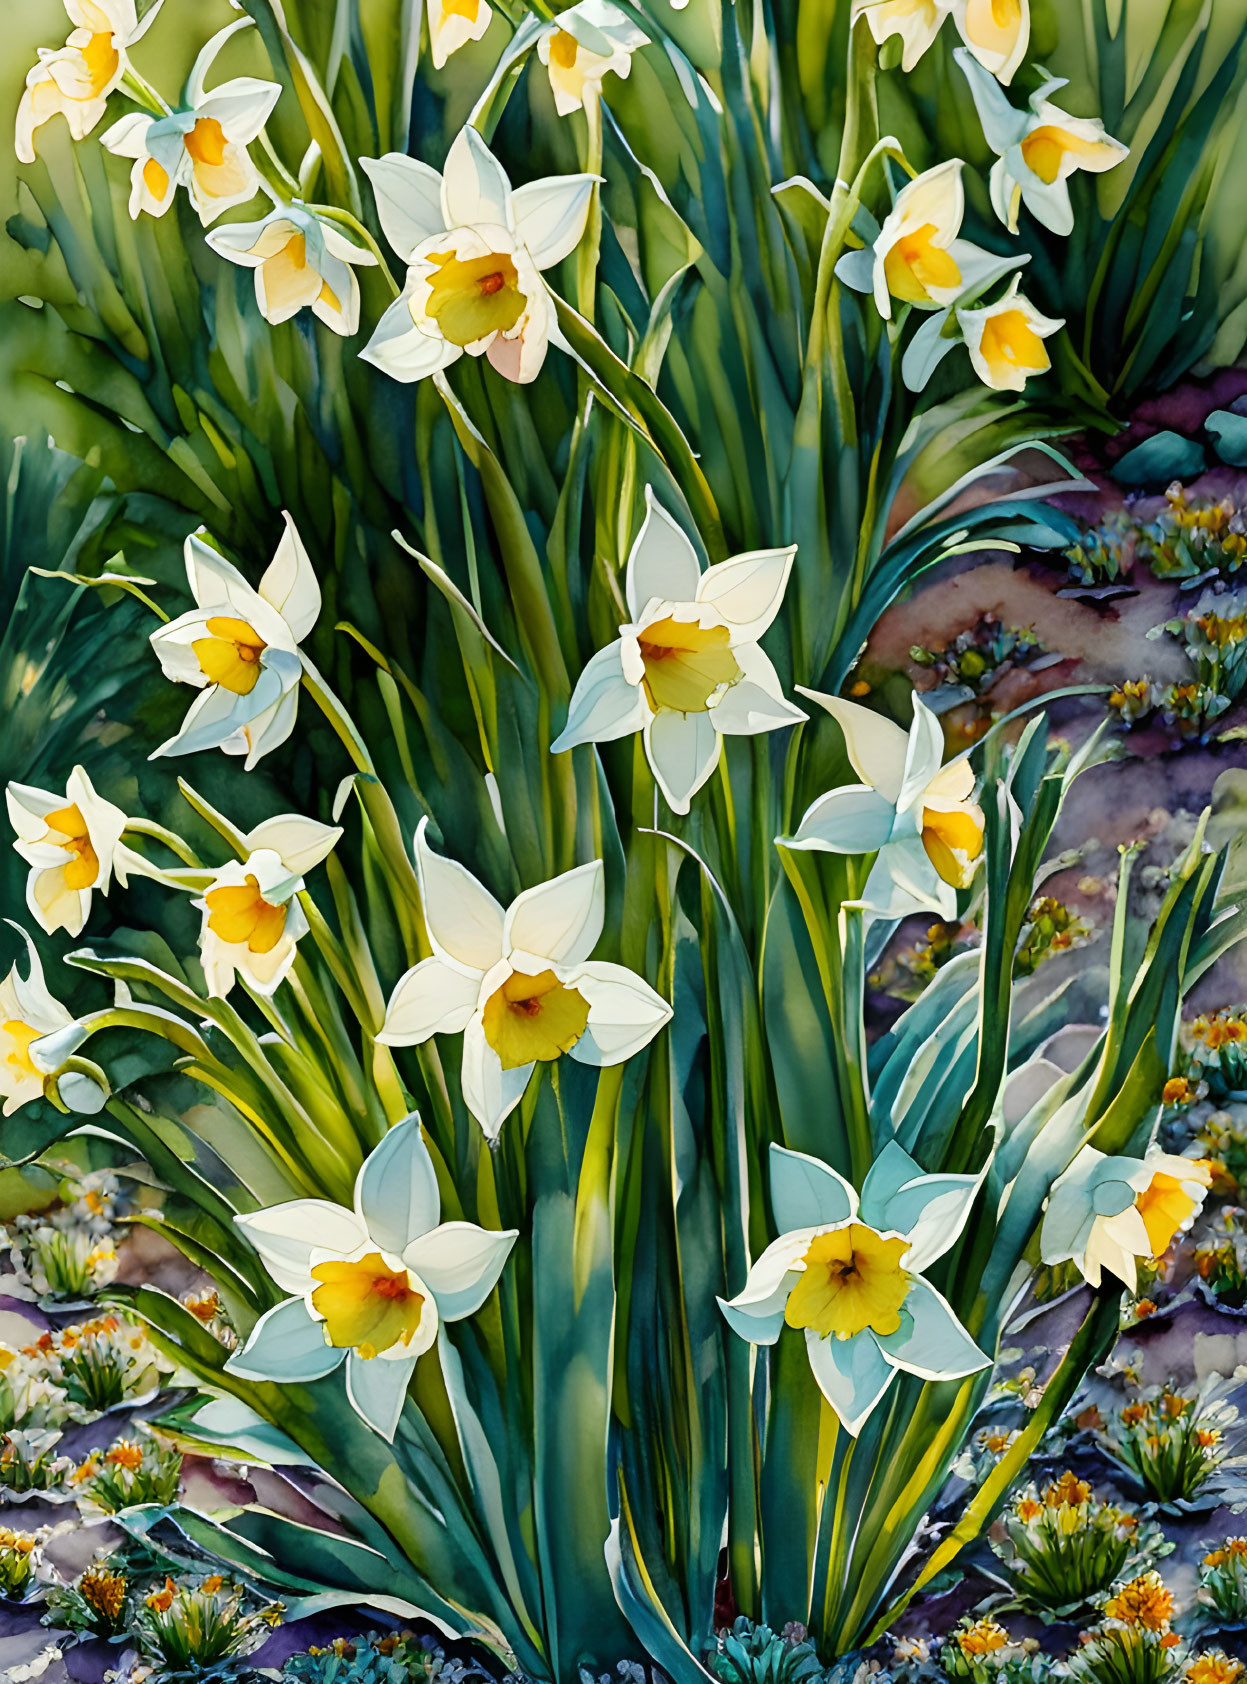 Colorful daffodil cluster with green foliage on textured background